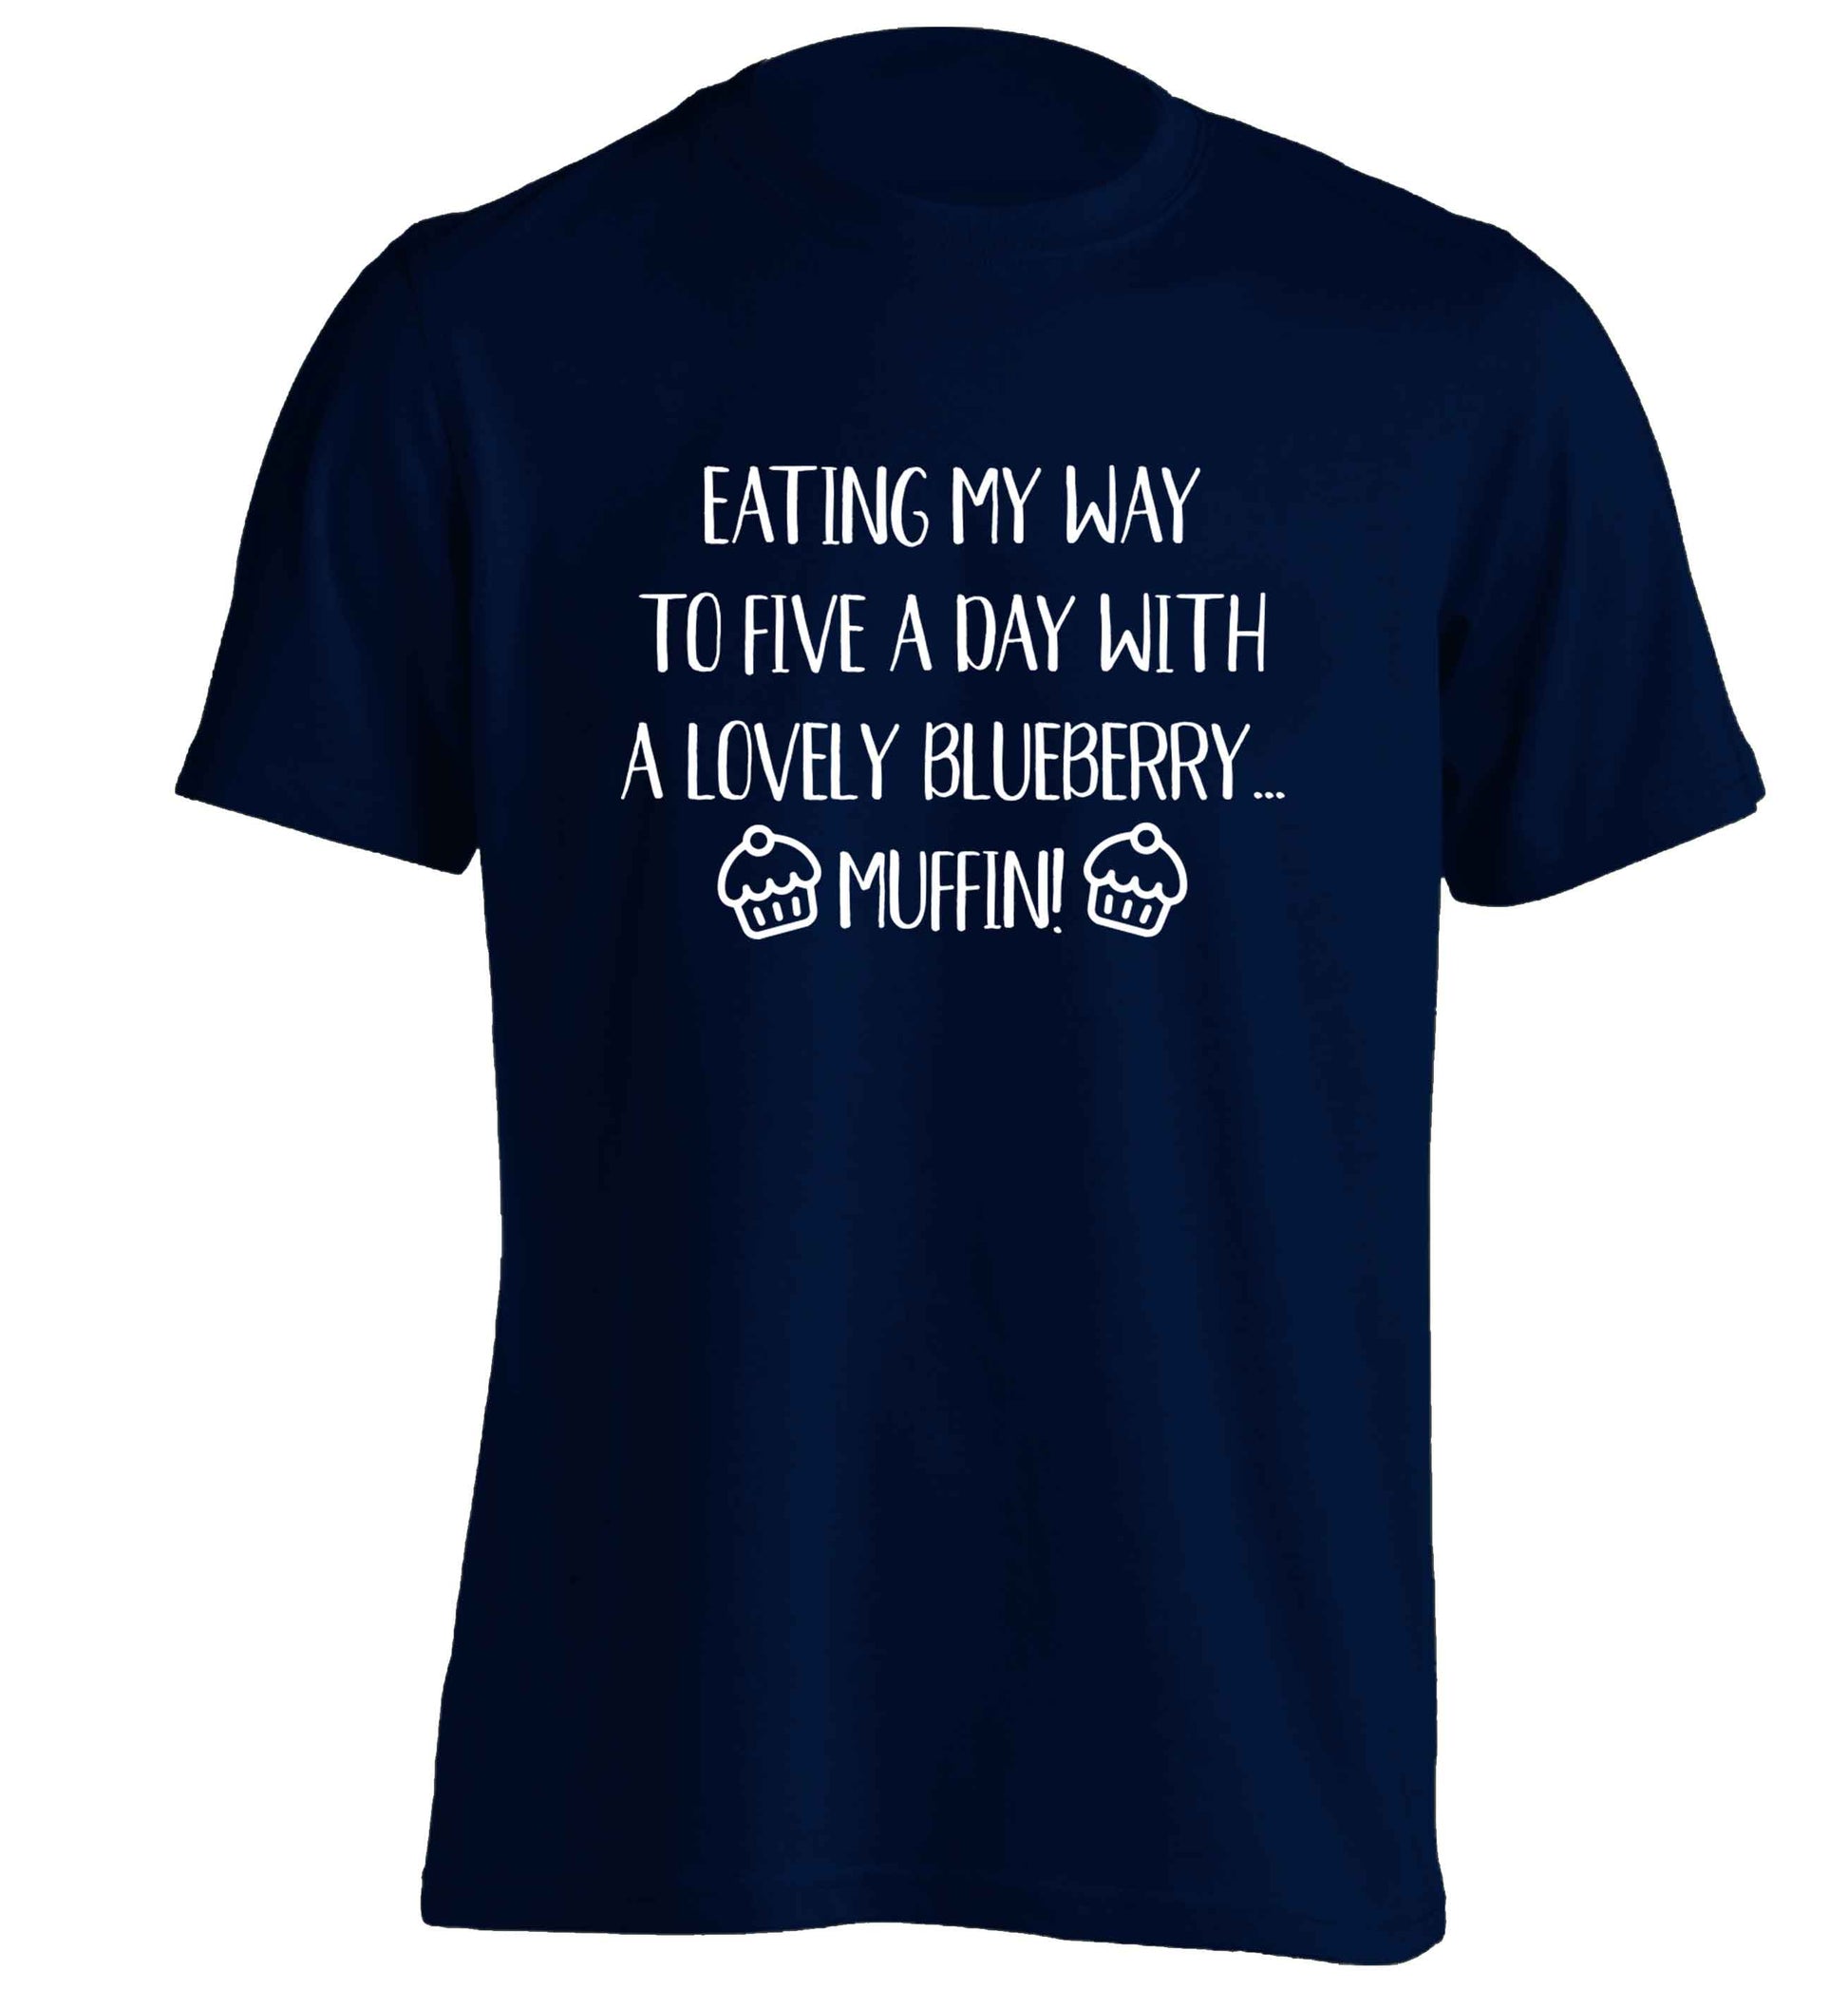 Eating my way to five a day with a lovely blueberry muffin adults unisex navy Tshirt 2XL